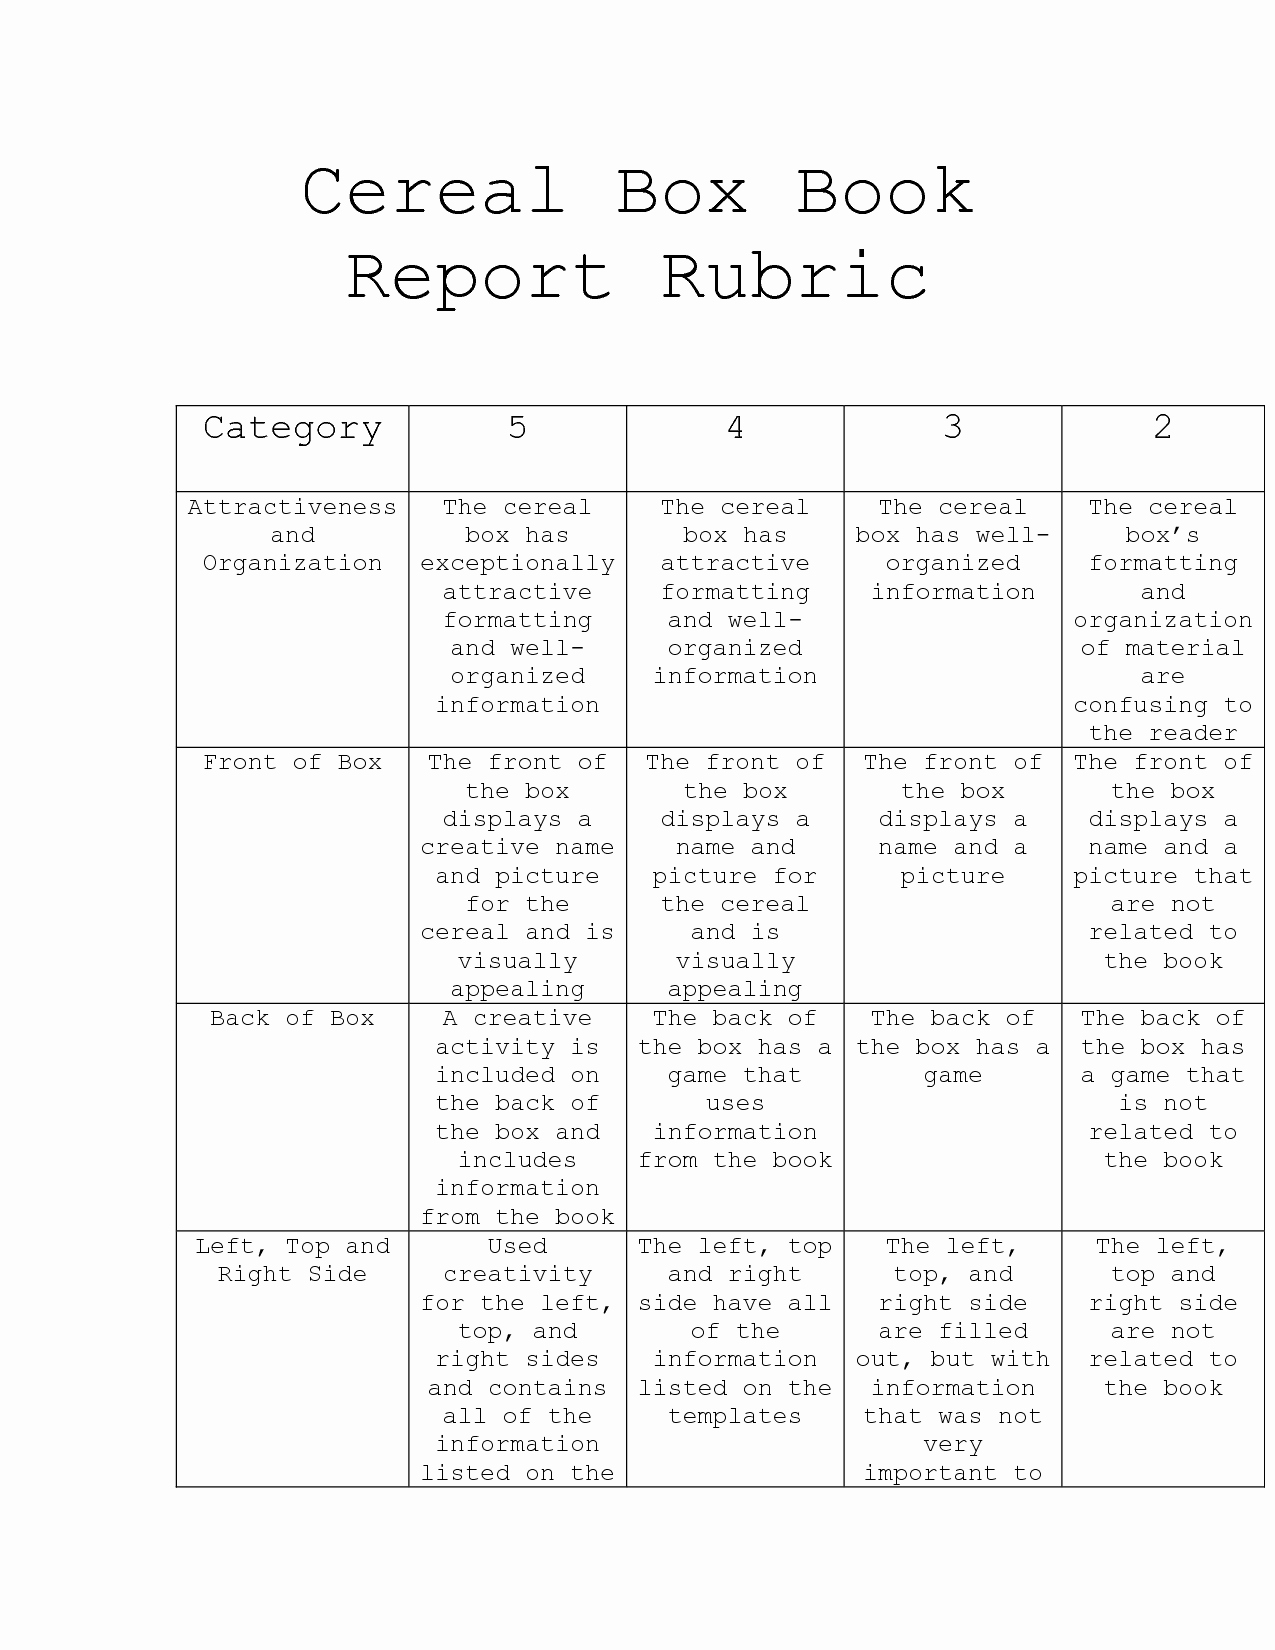 Cereal Box Book Report Samples Awesome Book Report Rubric